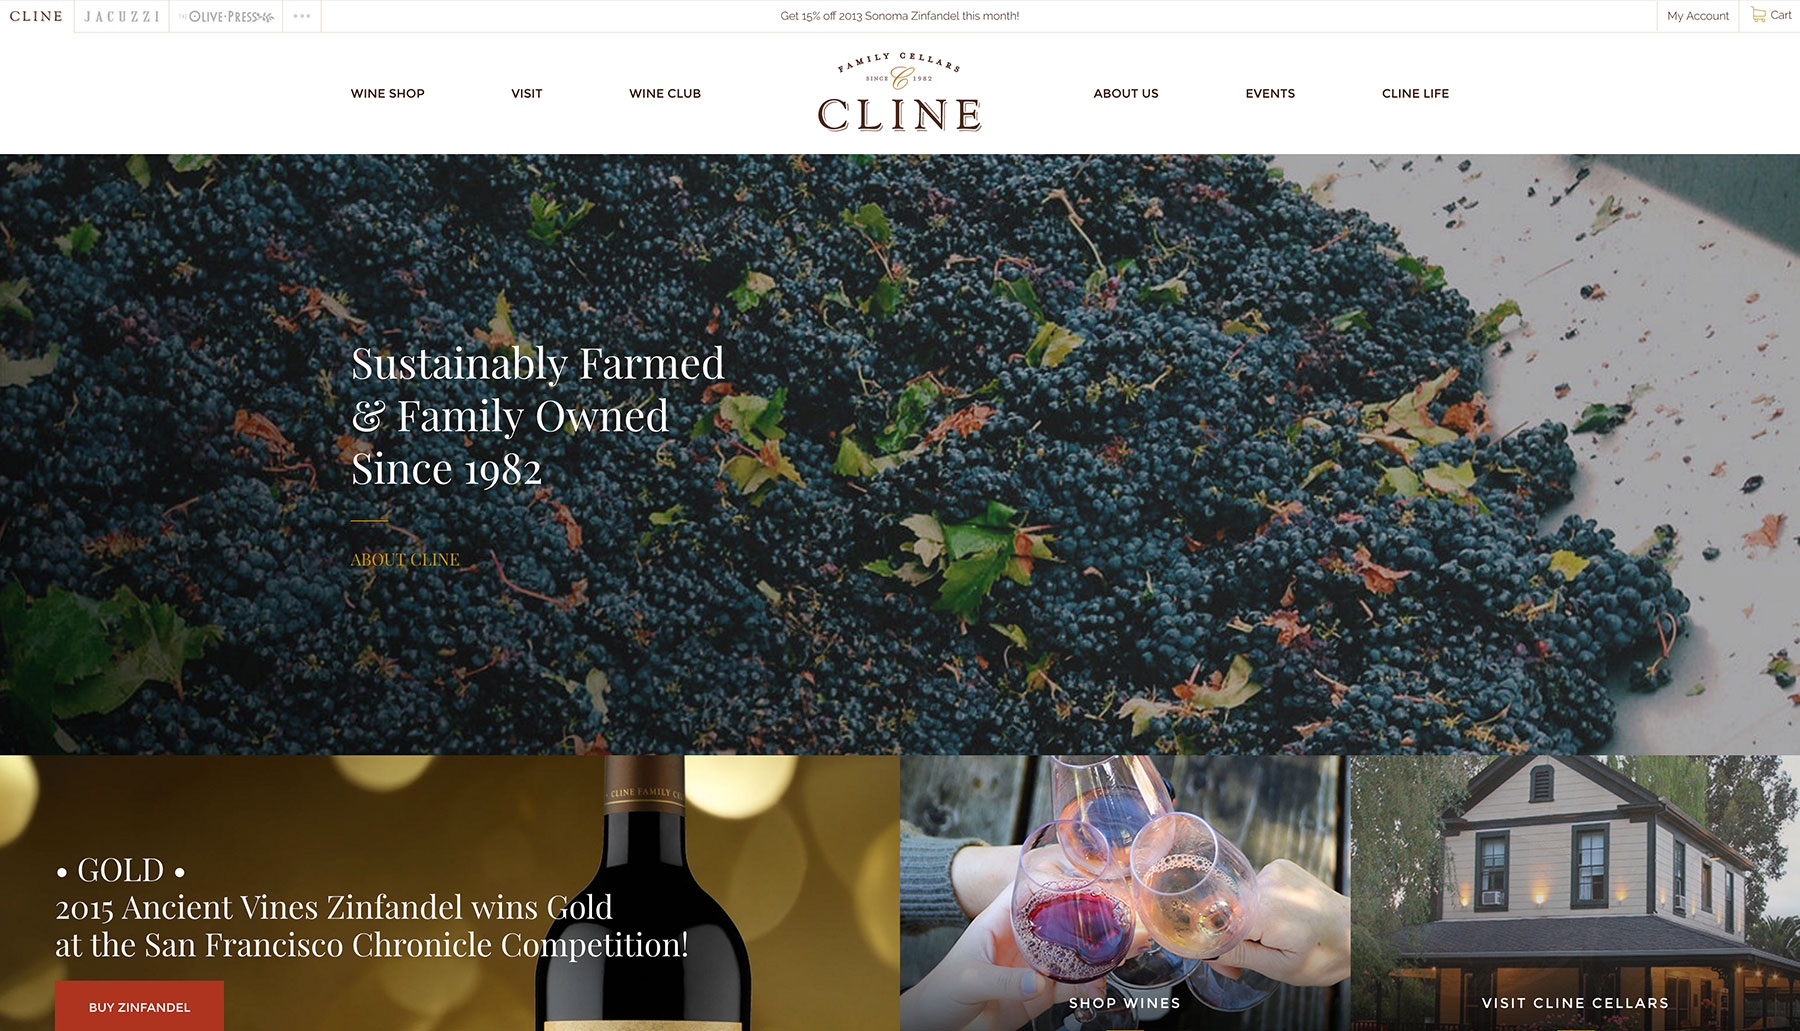 A screenshot of one of the best winery websites we found: Cline Cellars.